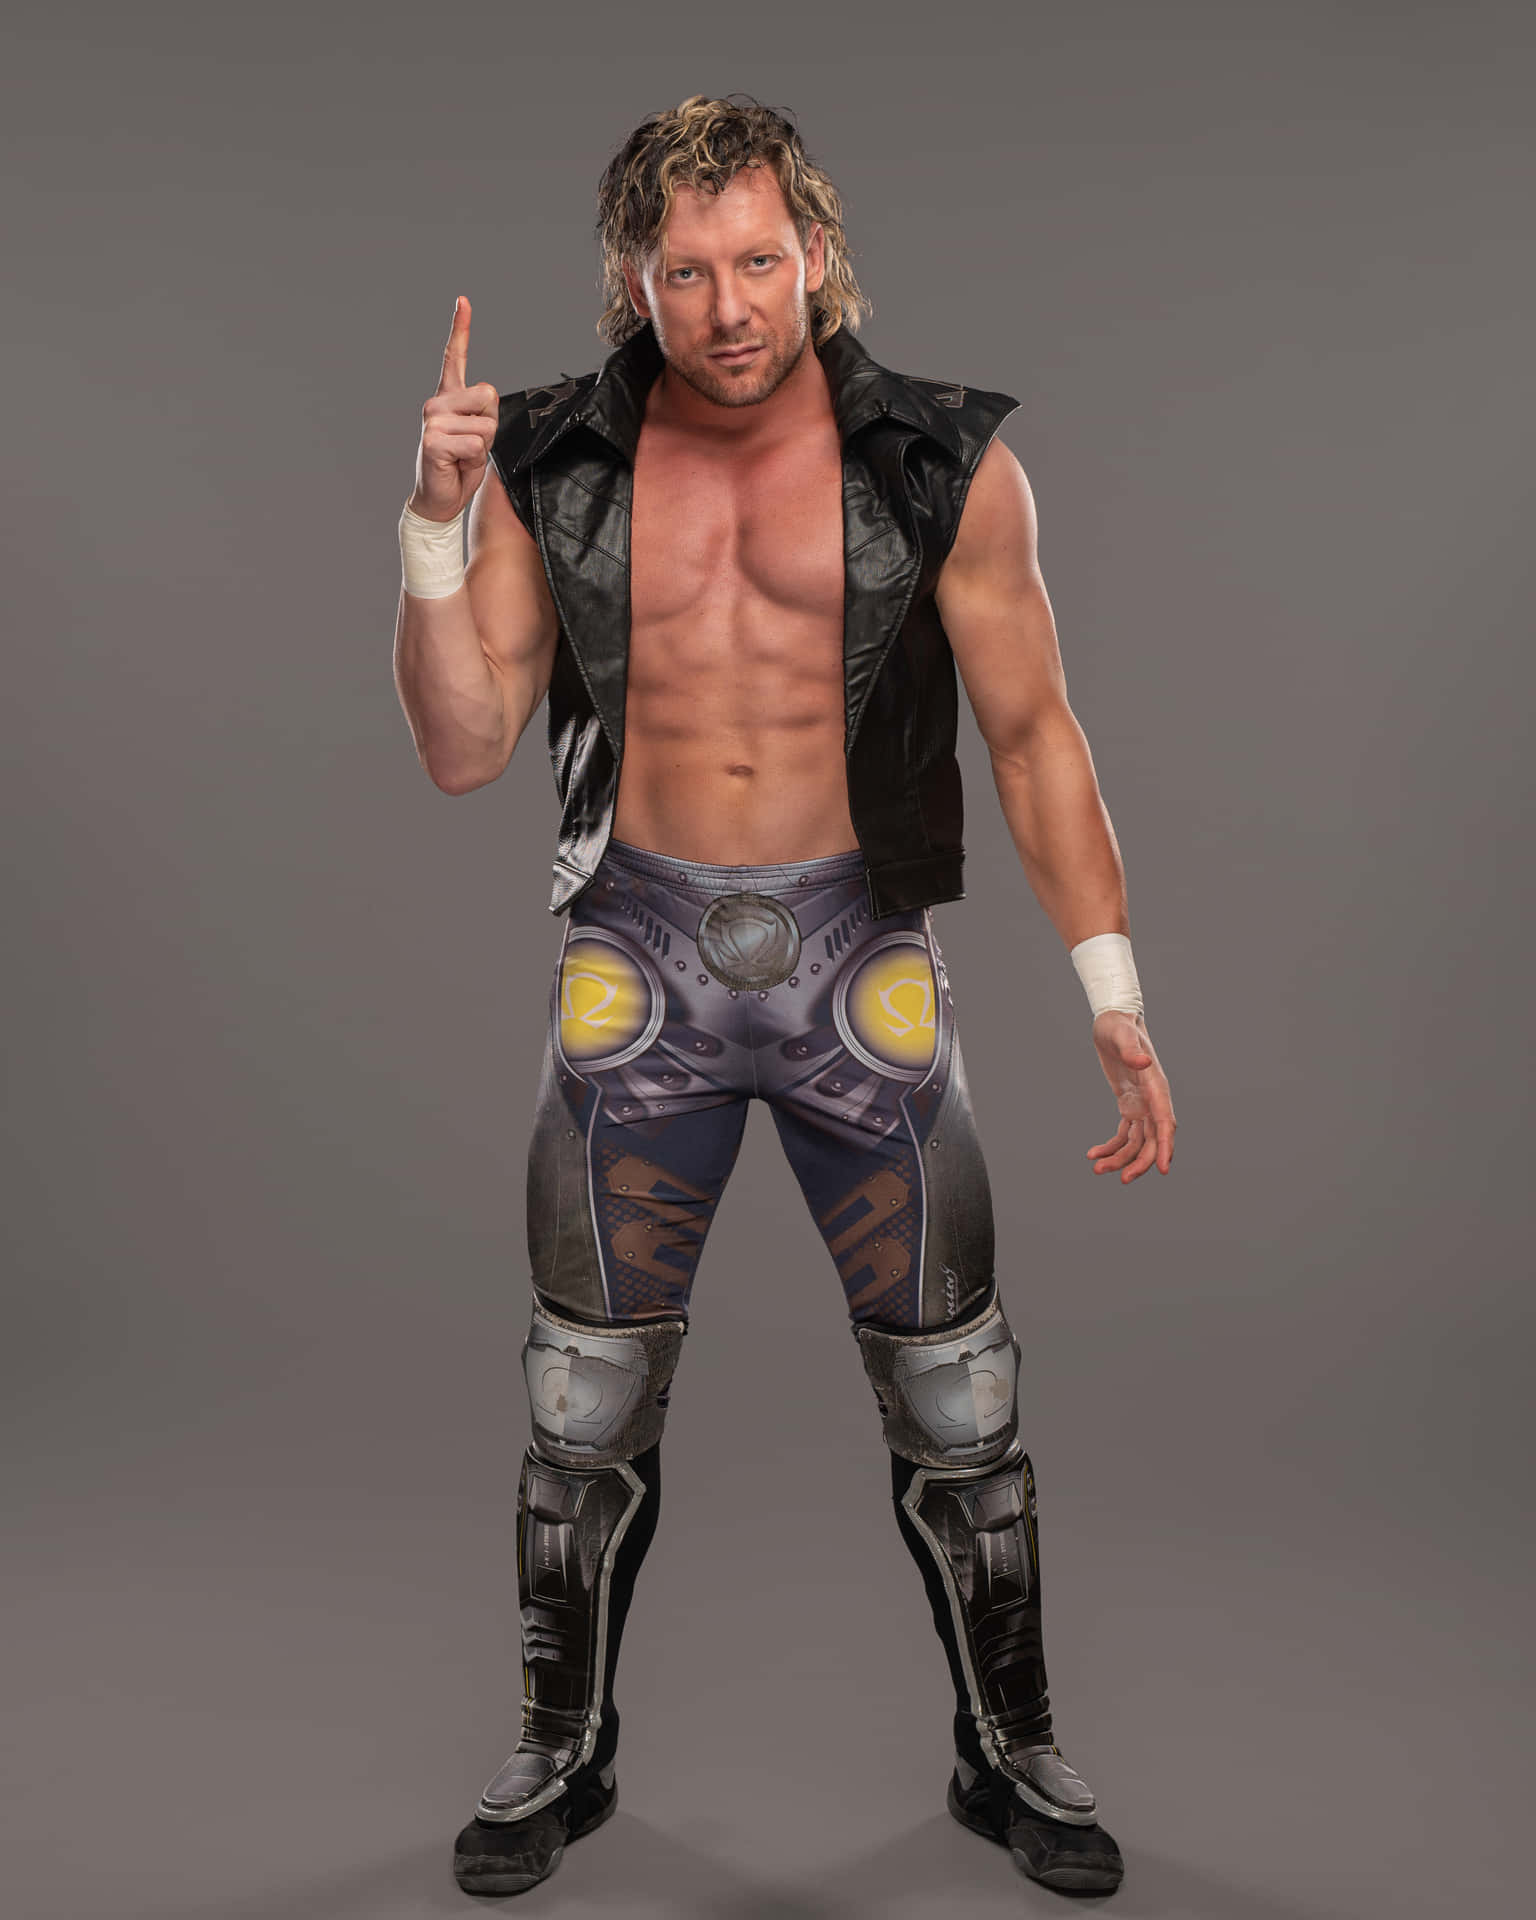 Kenny Omega Wrestling Attire Photoshoot Picture